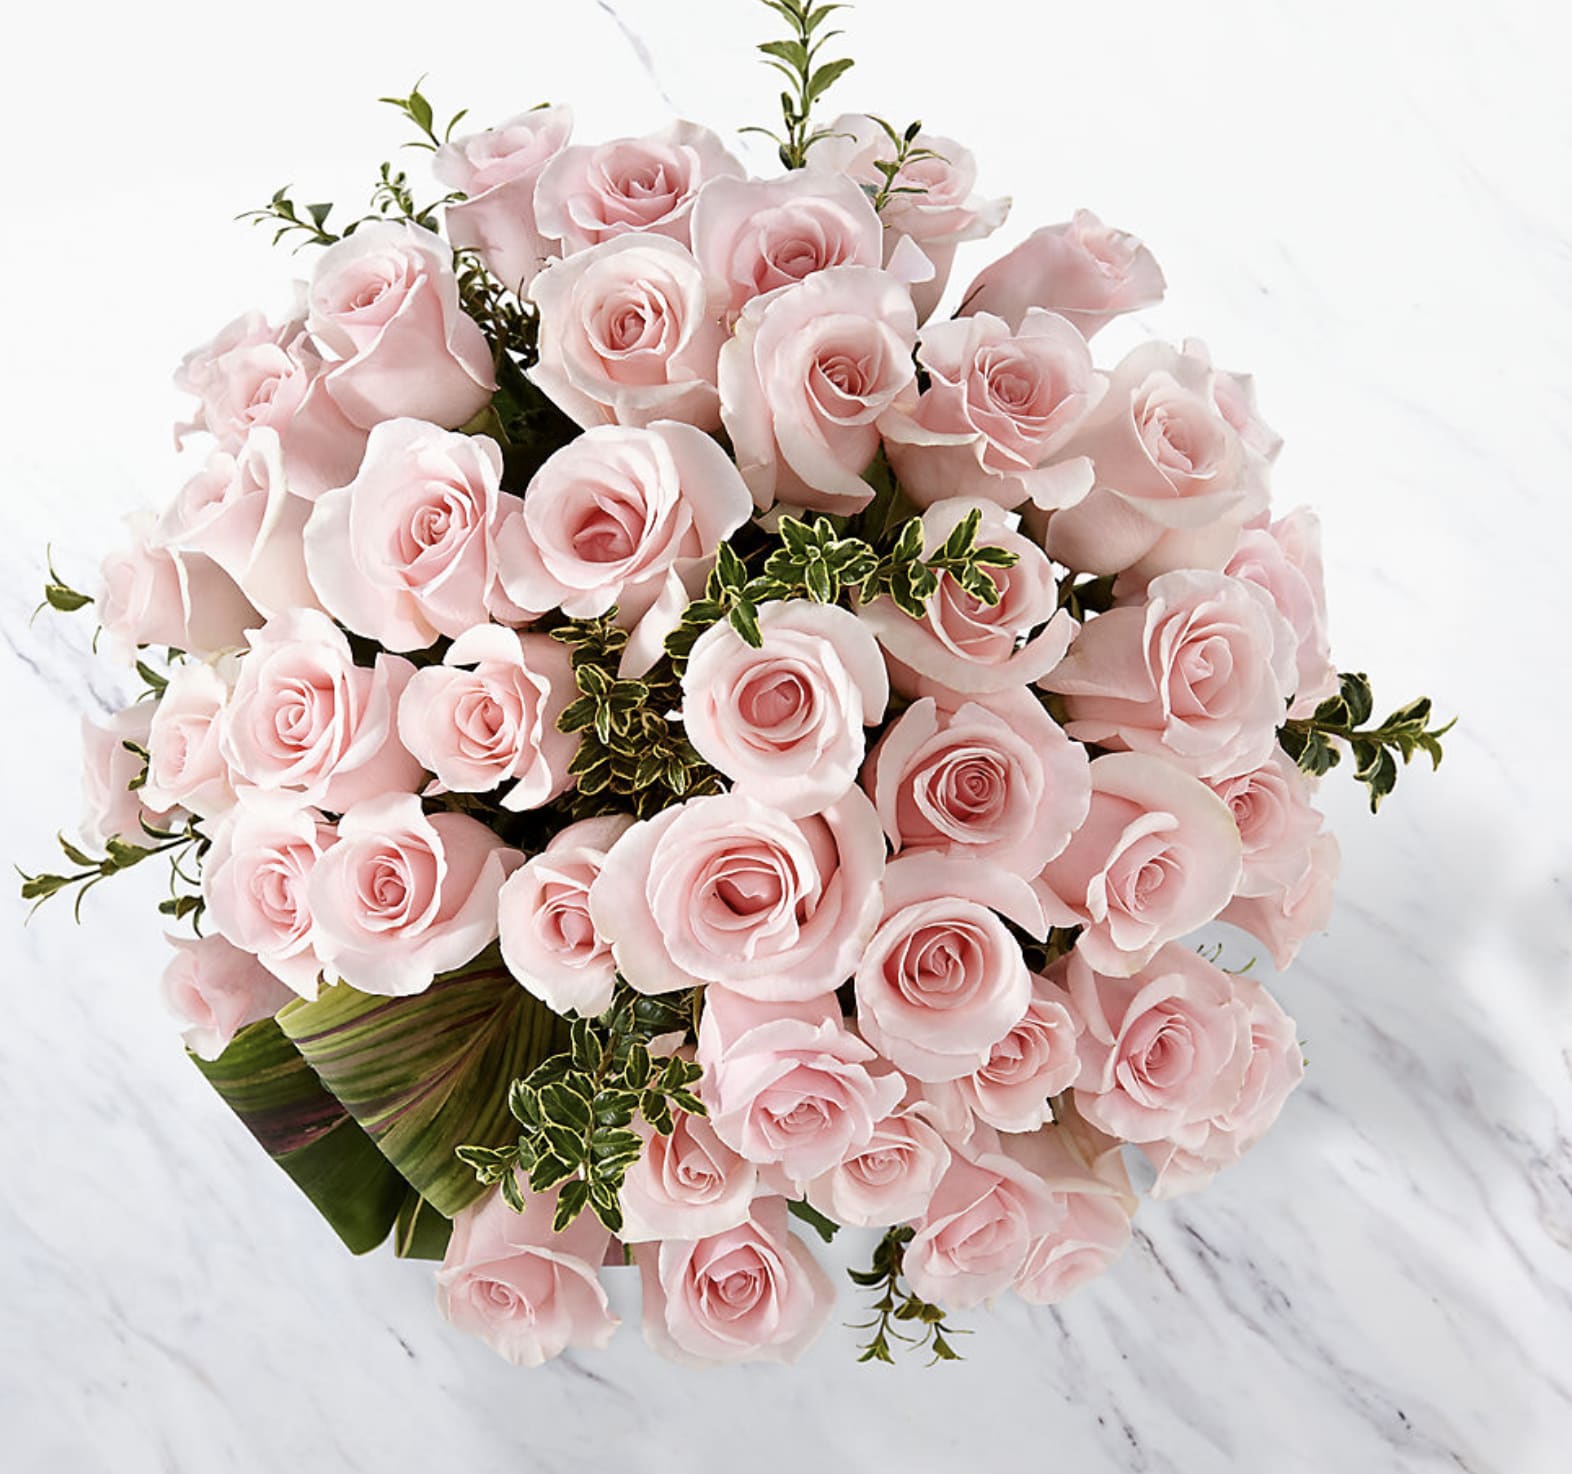 Delighted Luxury Rose Bouquet - 48 Premium Long-Stemmed Roses